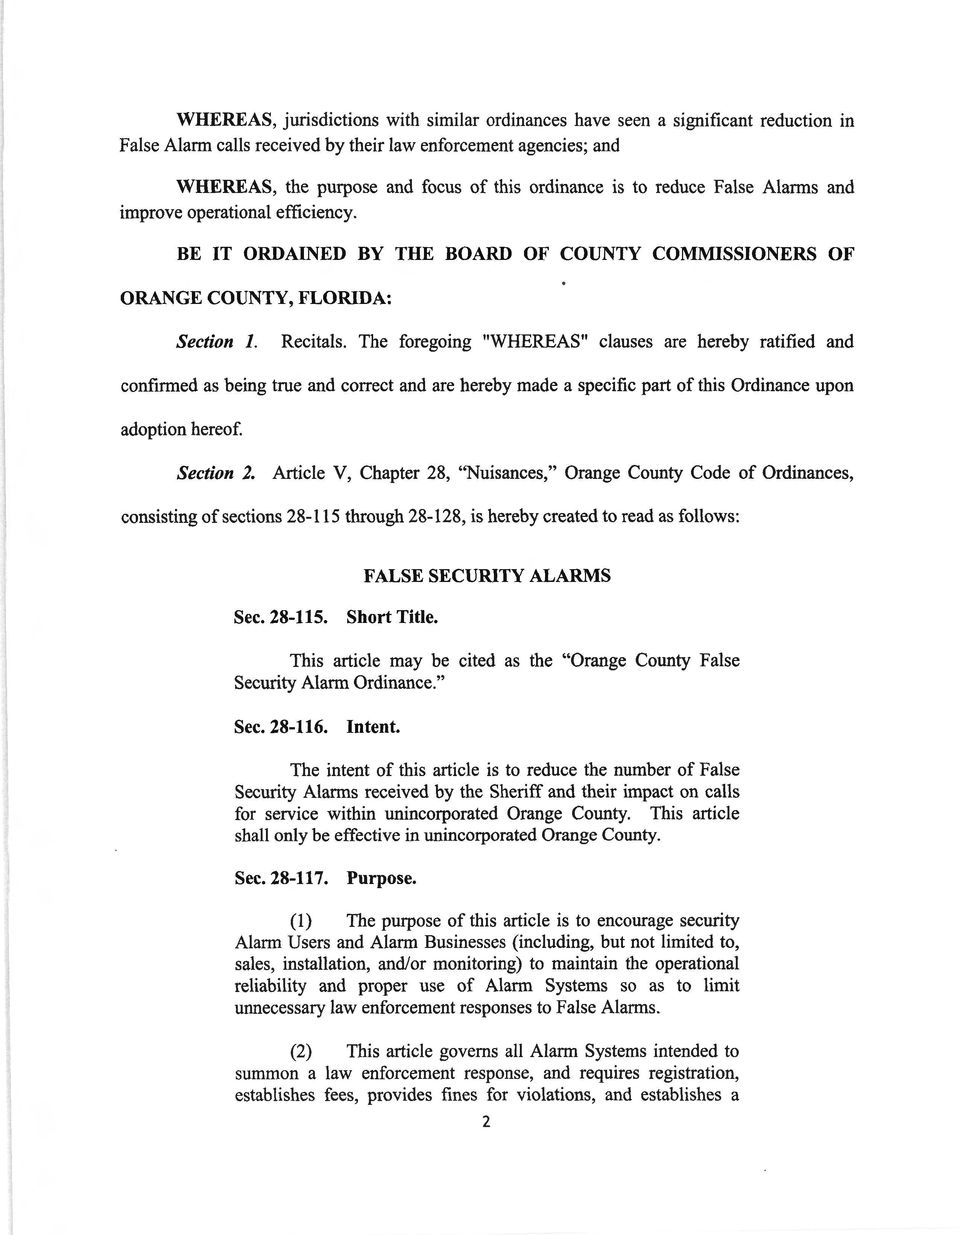 The foregoing "WHEREAS" clauses are hereby ratified and confirmed as being true and correct and are hereby made a specific part of this Ordinance upon adoption hereof. Section 2.